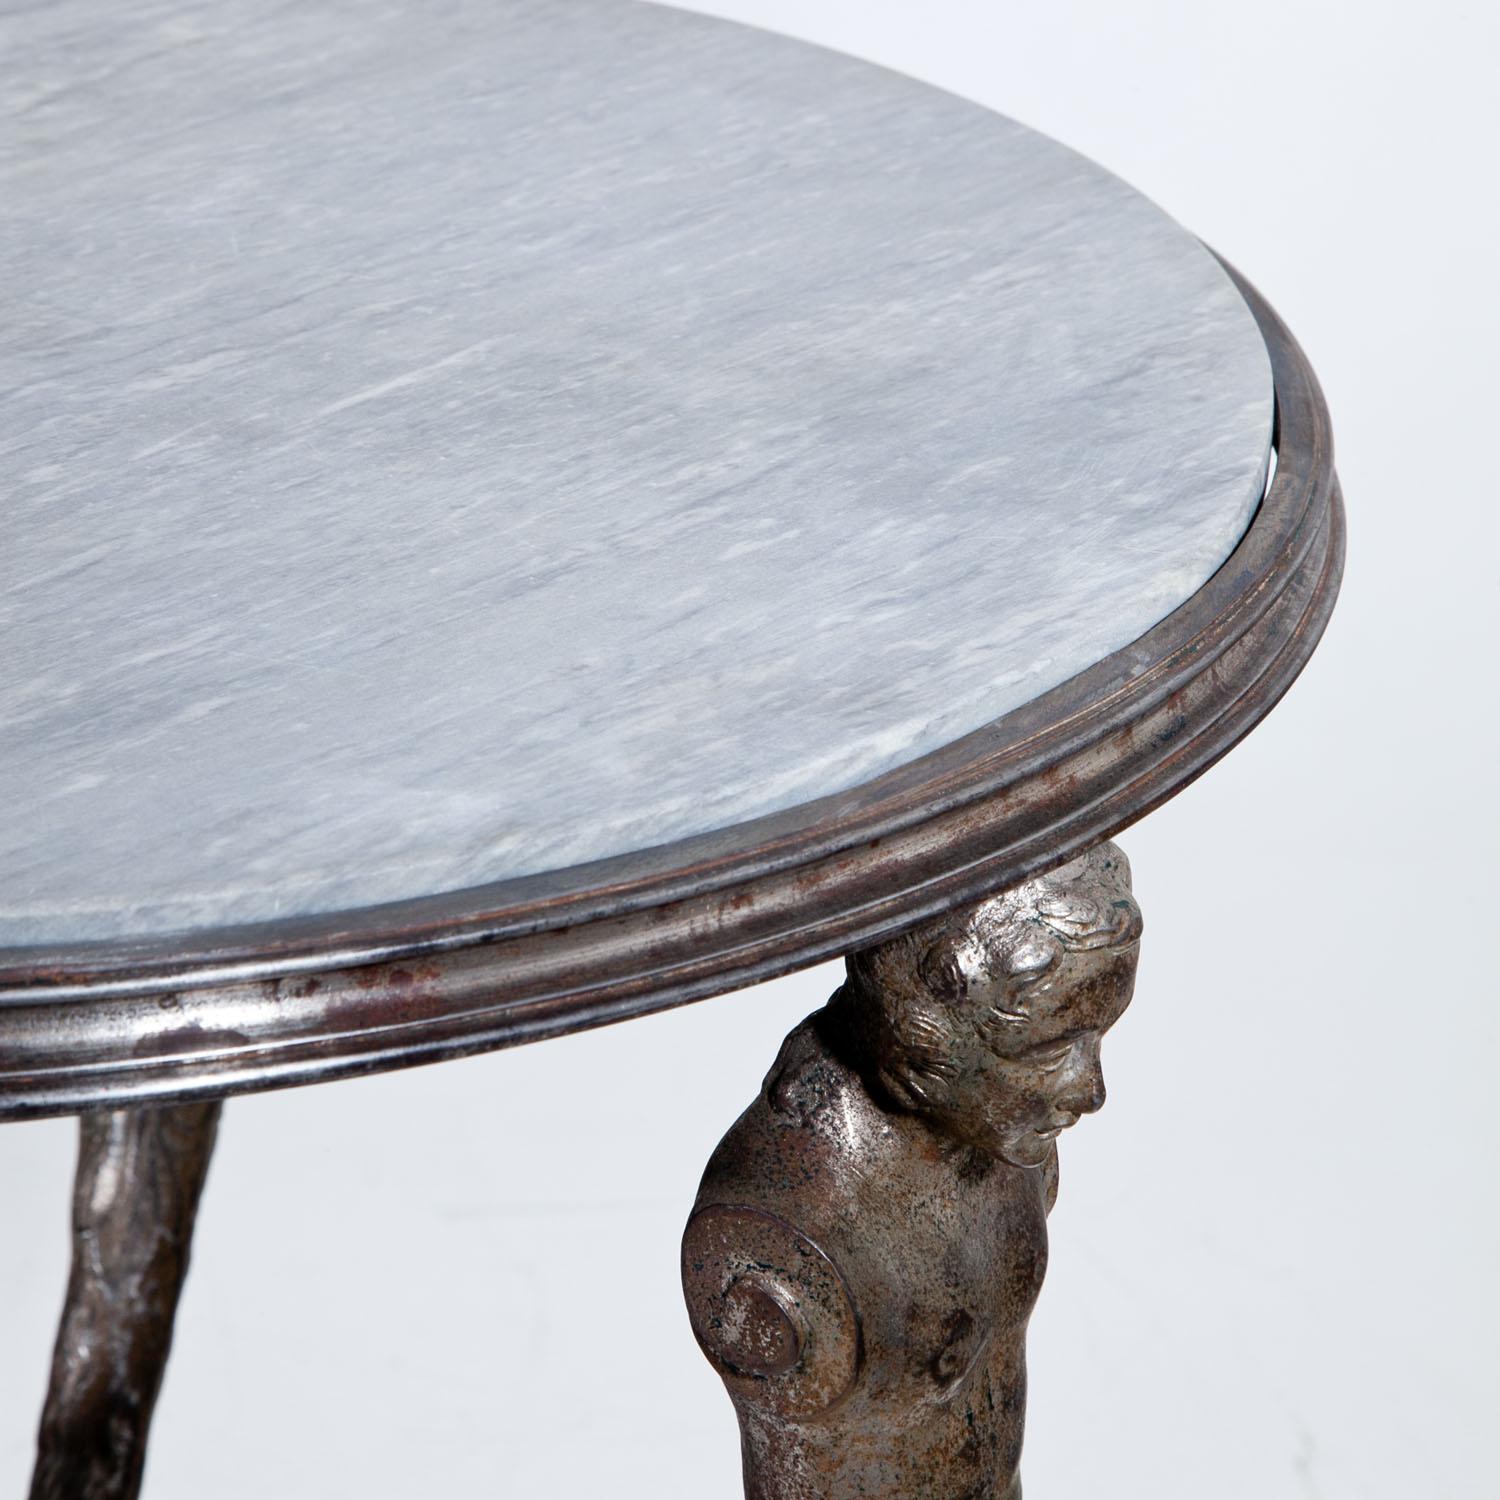 Iron table with three legs and atlantes without arms carrying the grey marble tabletop. The feet end in stylized hooves. Between the legs is a second tier with a smaller grey marble top.